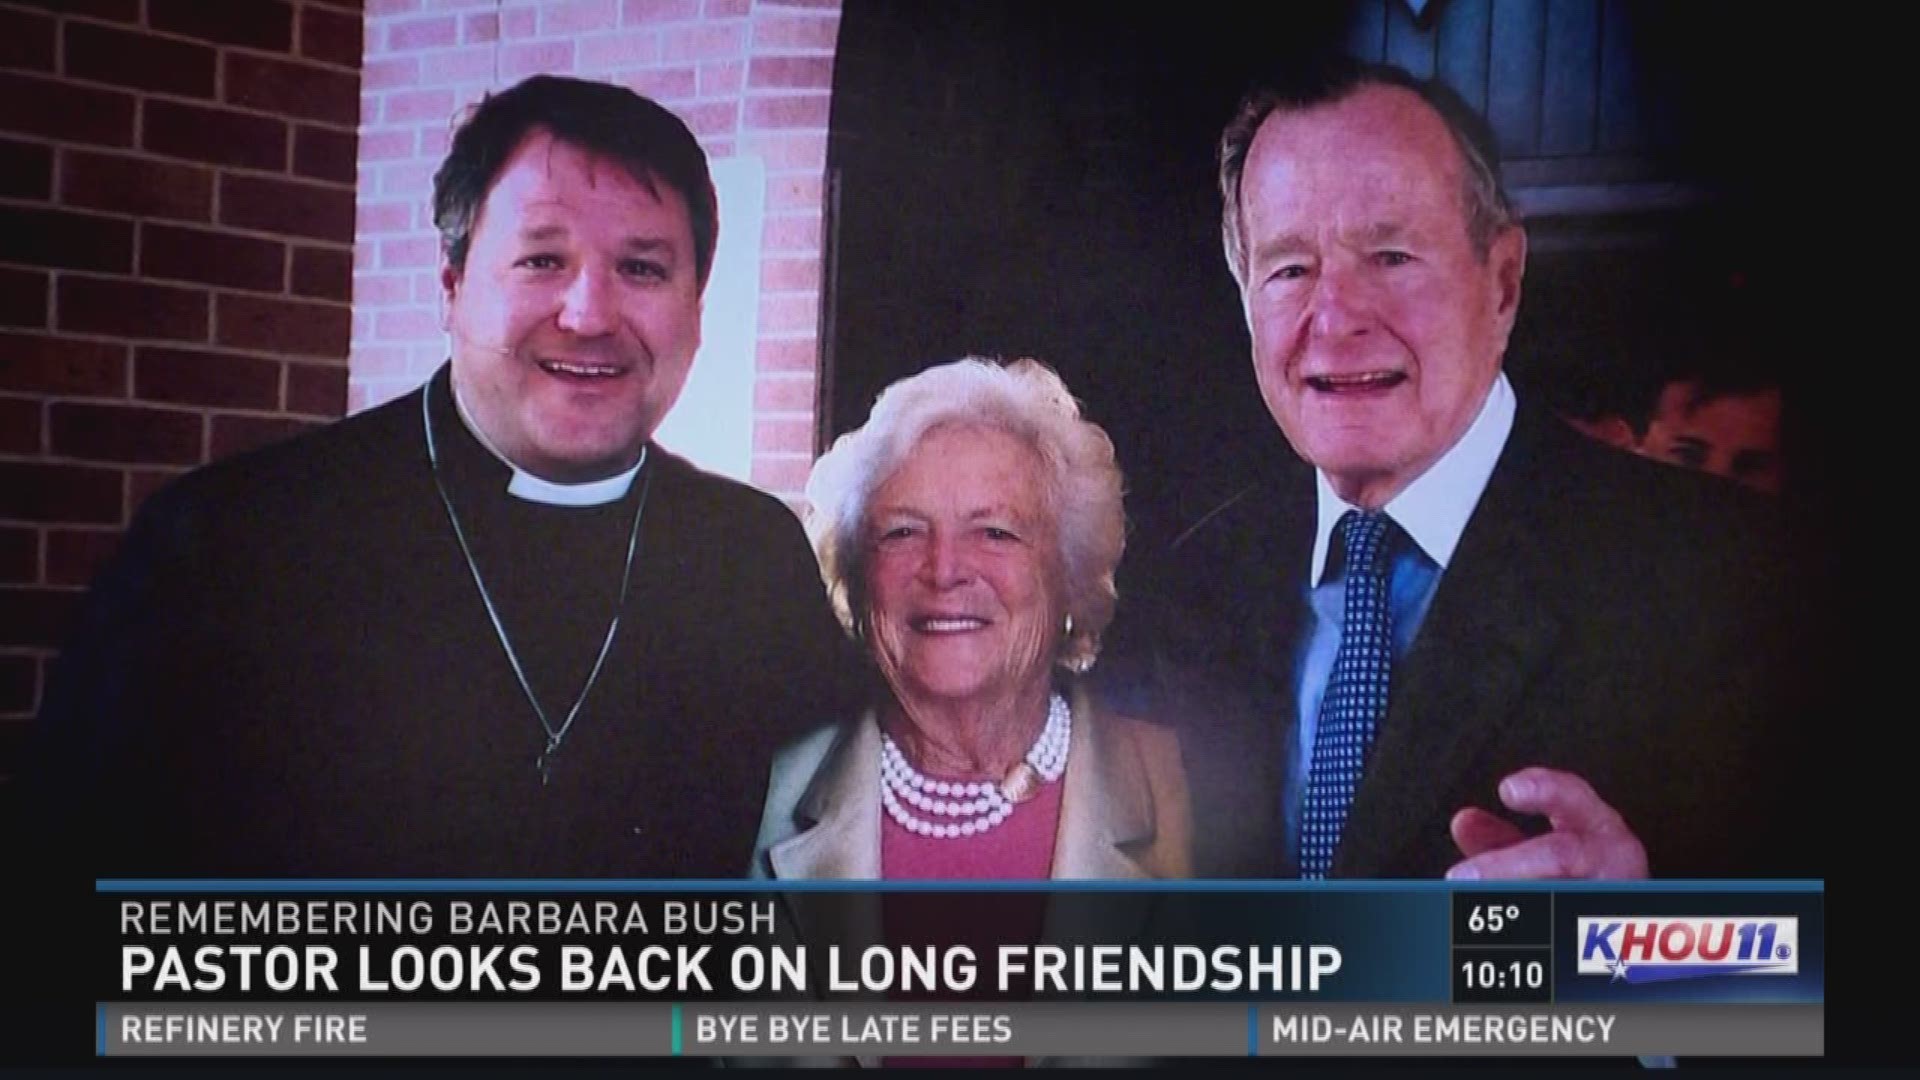 Dr. Russell Levenson reflects on his friendship with the late Barbara Bush.